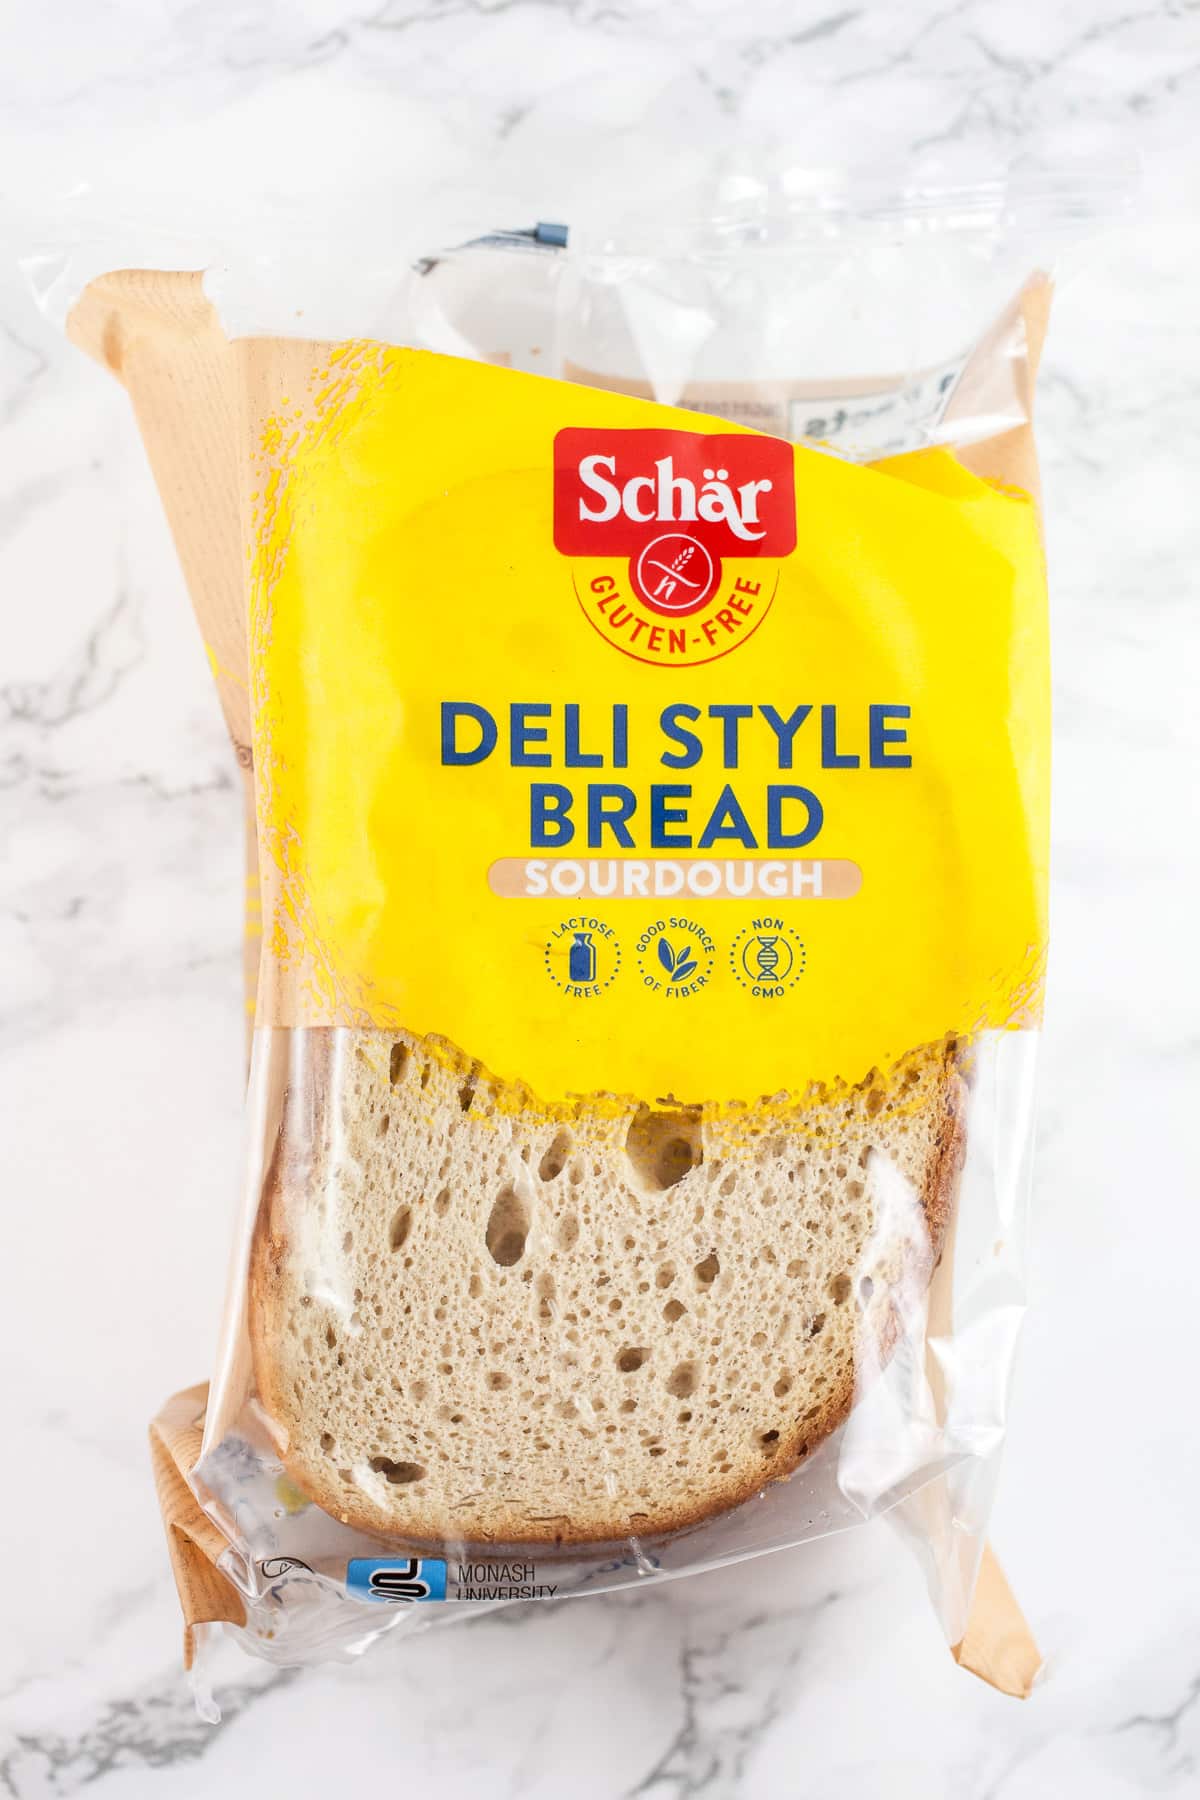 Unopened package of gluten free deli style bread on white surface.